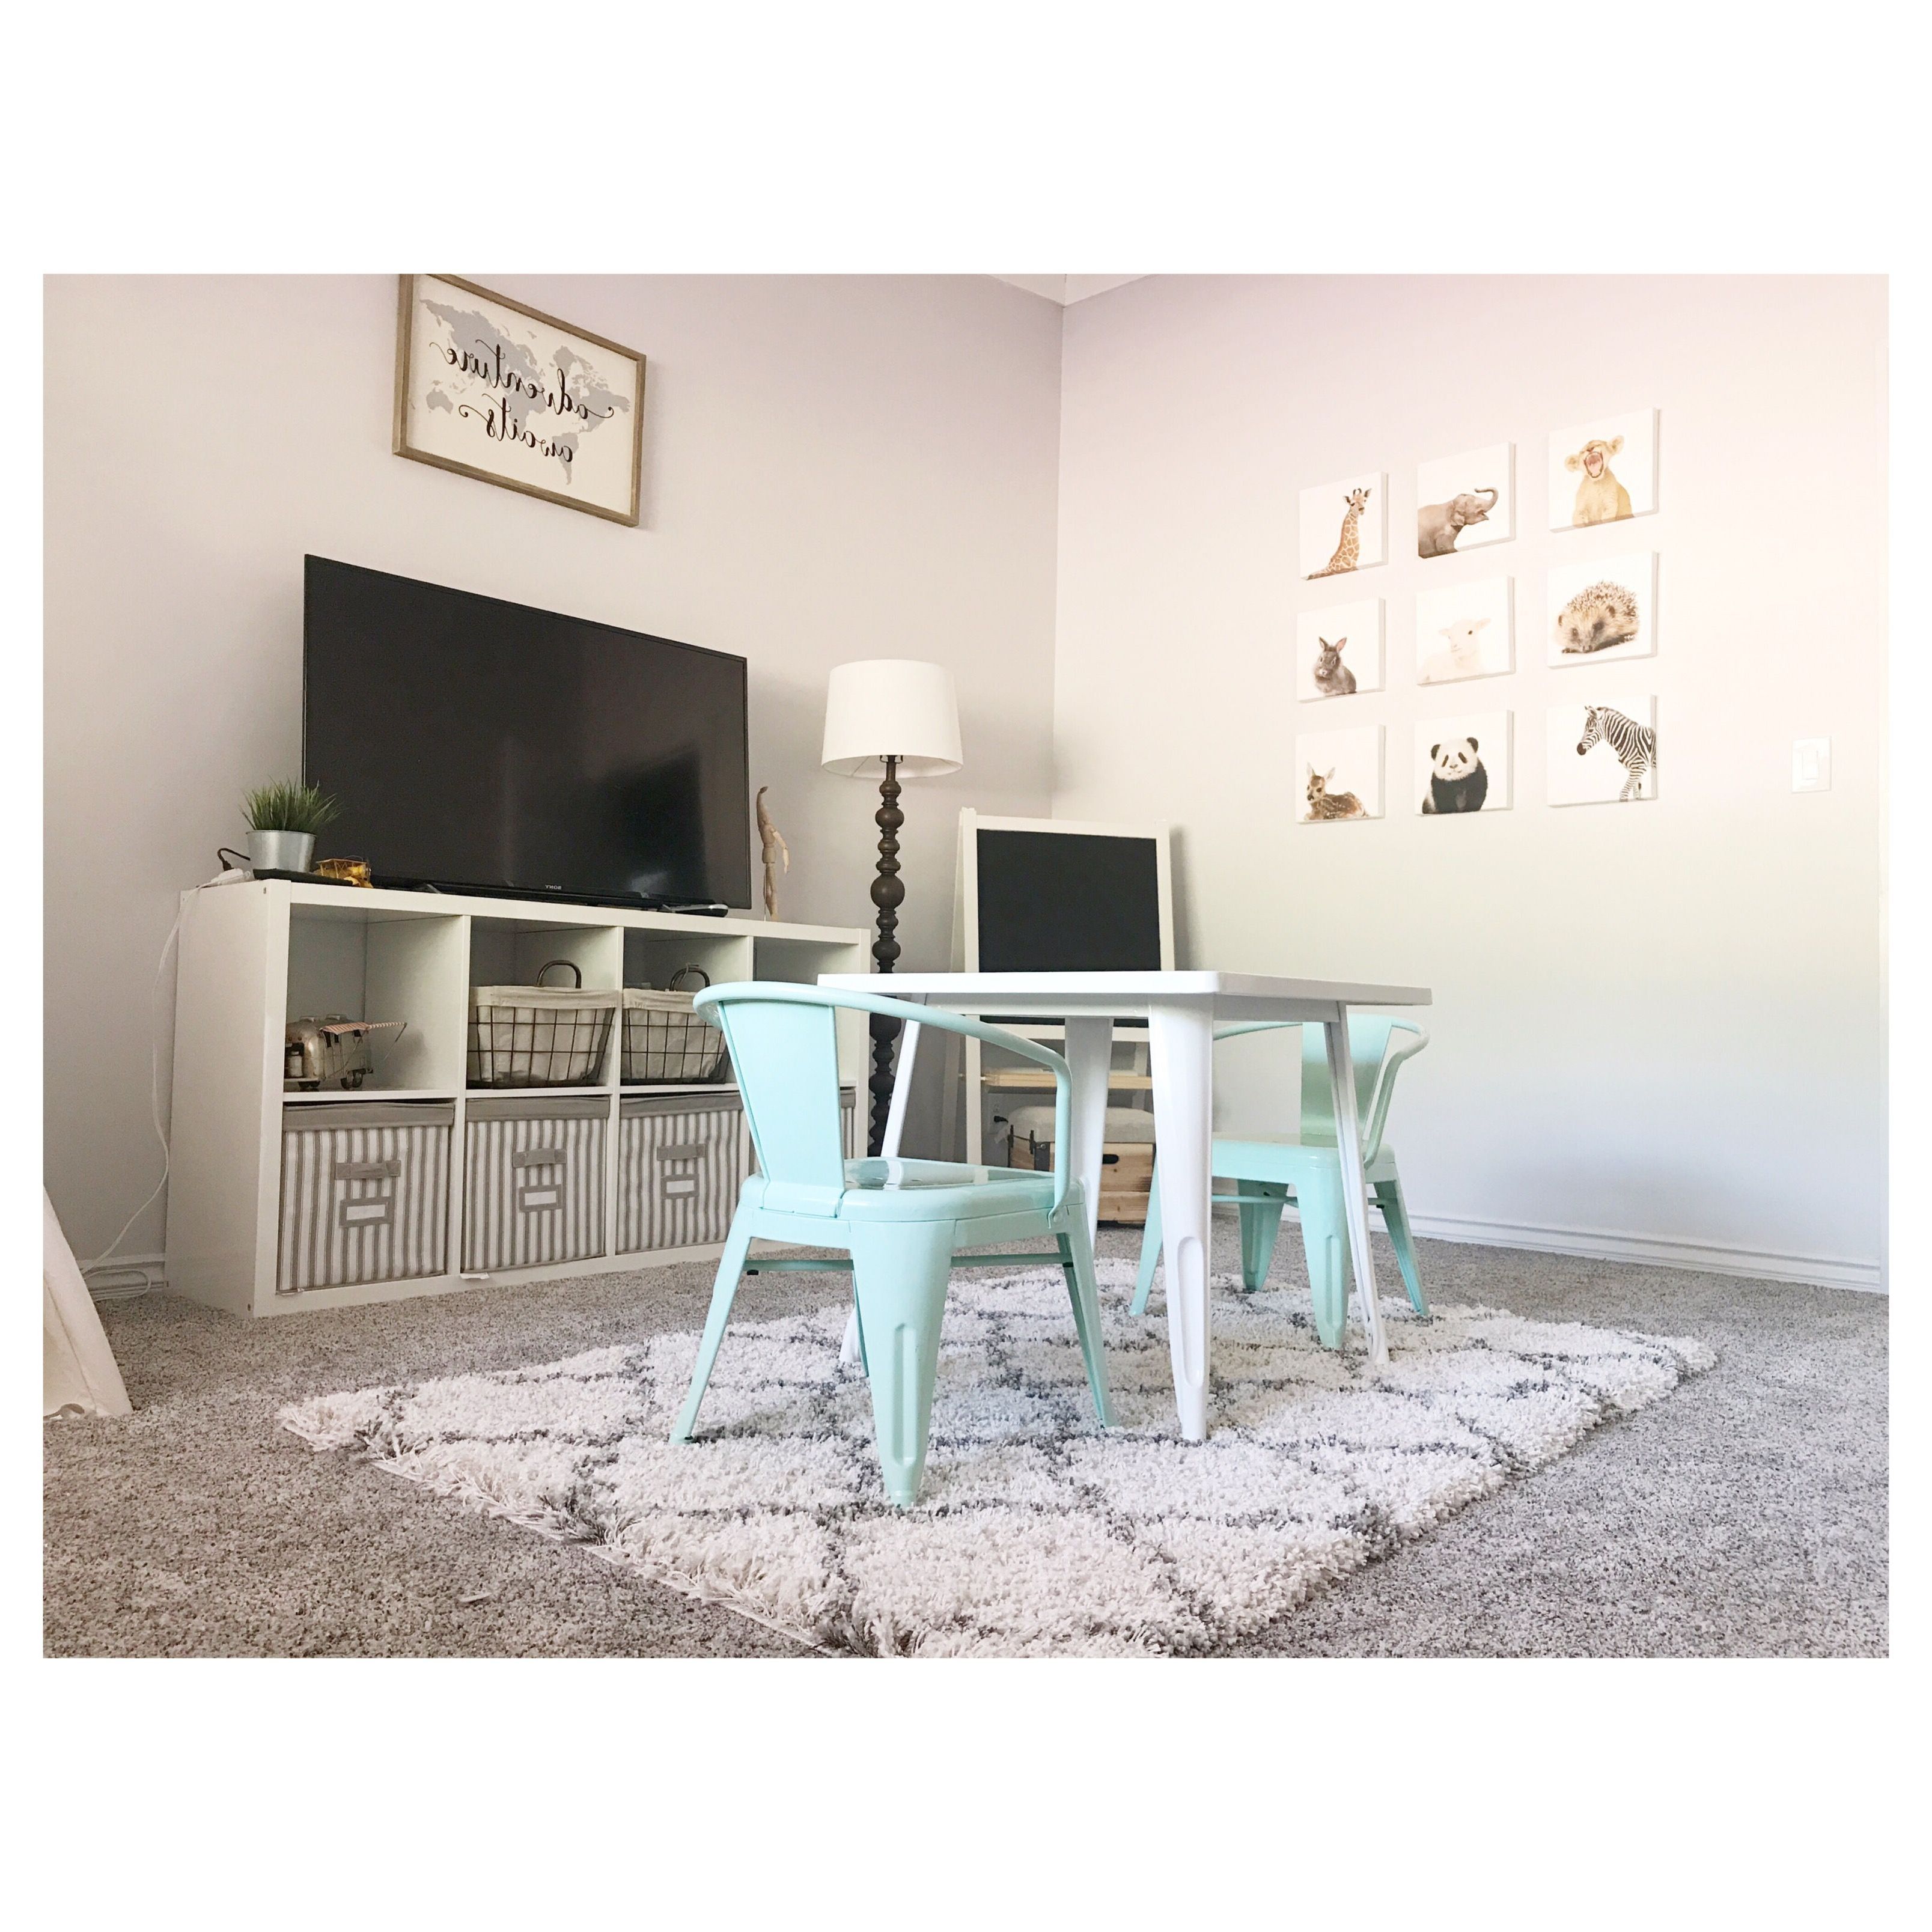 Playroom Tv Stands Inside Widely Used Desk Ikea Kitchen Dinette Sets Recliner Chairs Target Tv Stands With (View 16 of 20)